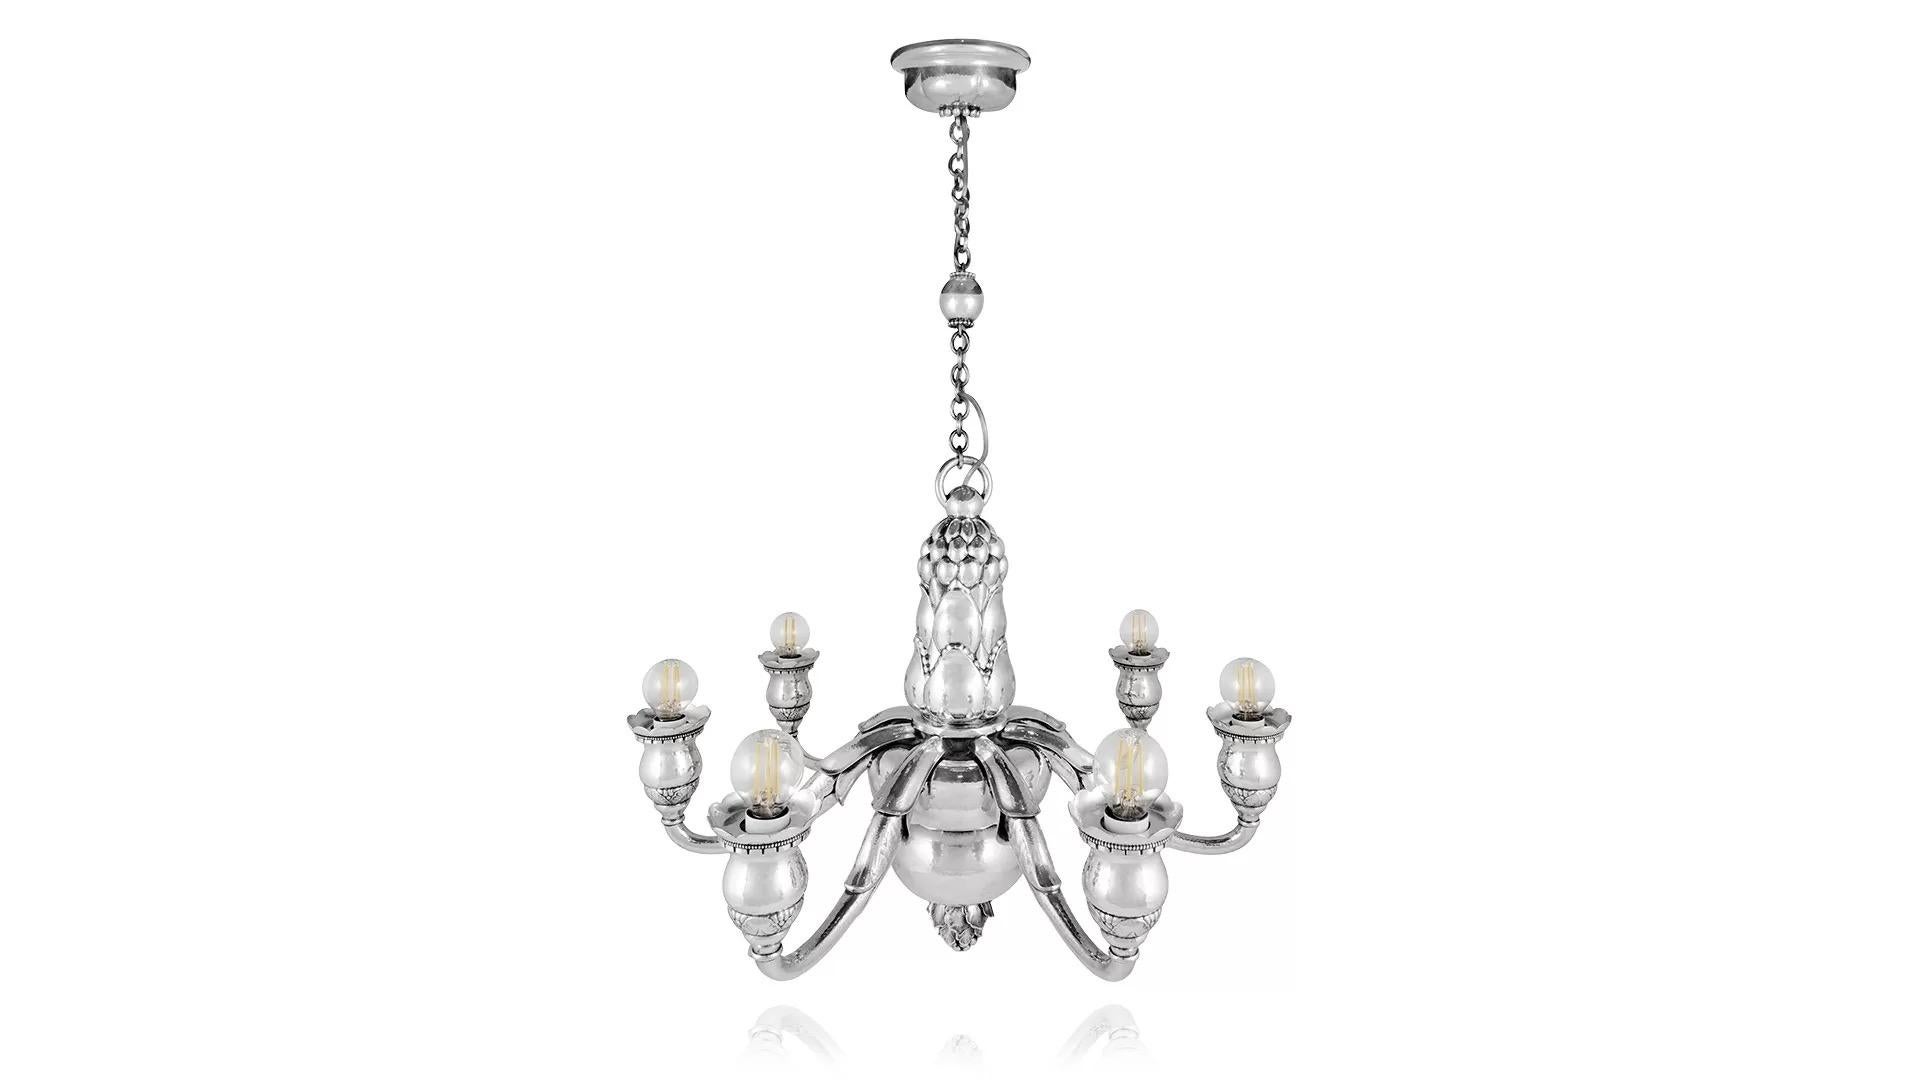 Very important and monumental sterling silver seven-light chandelier designed by Georg Jensen in 1919, that is electrified for 220 volt. The chandelier hangs on a chain attached to a large ring through a central silver ball, the central column is an